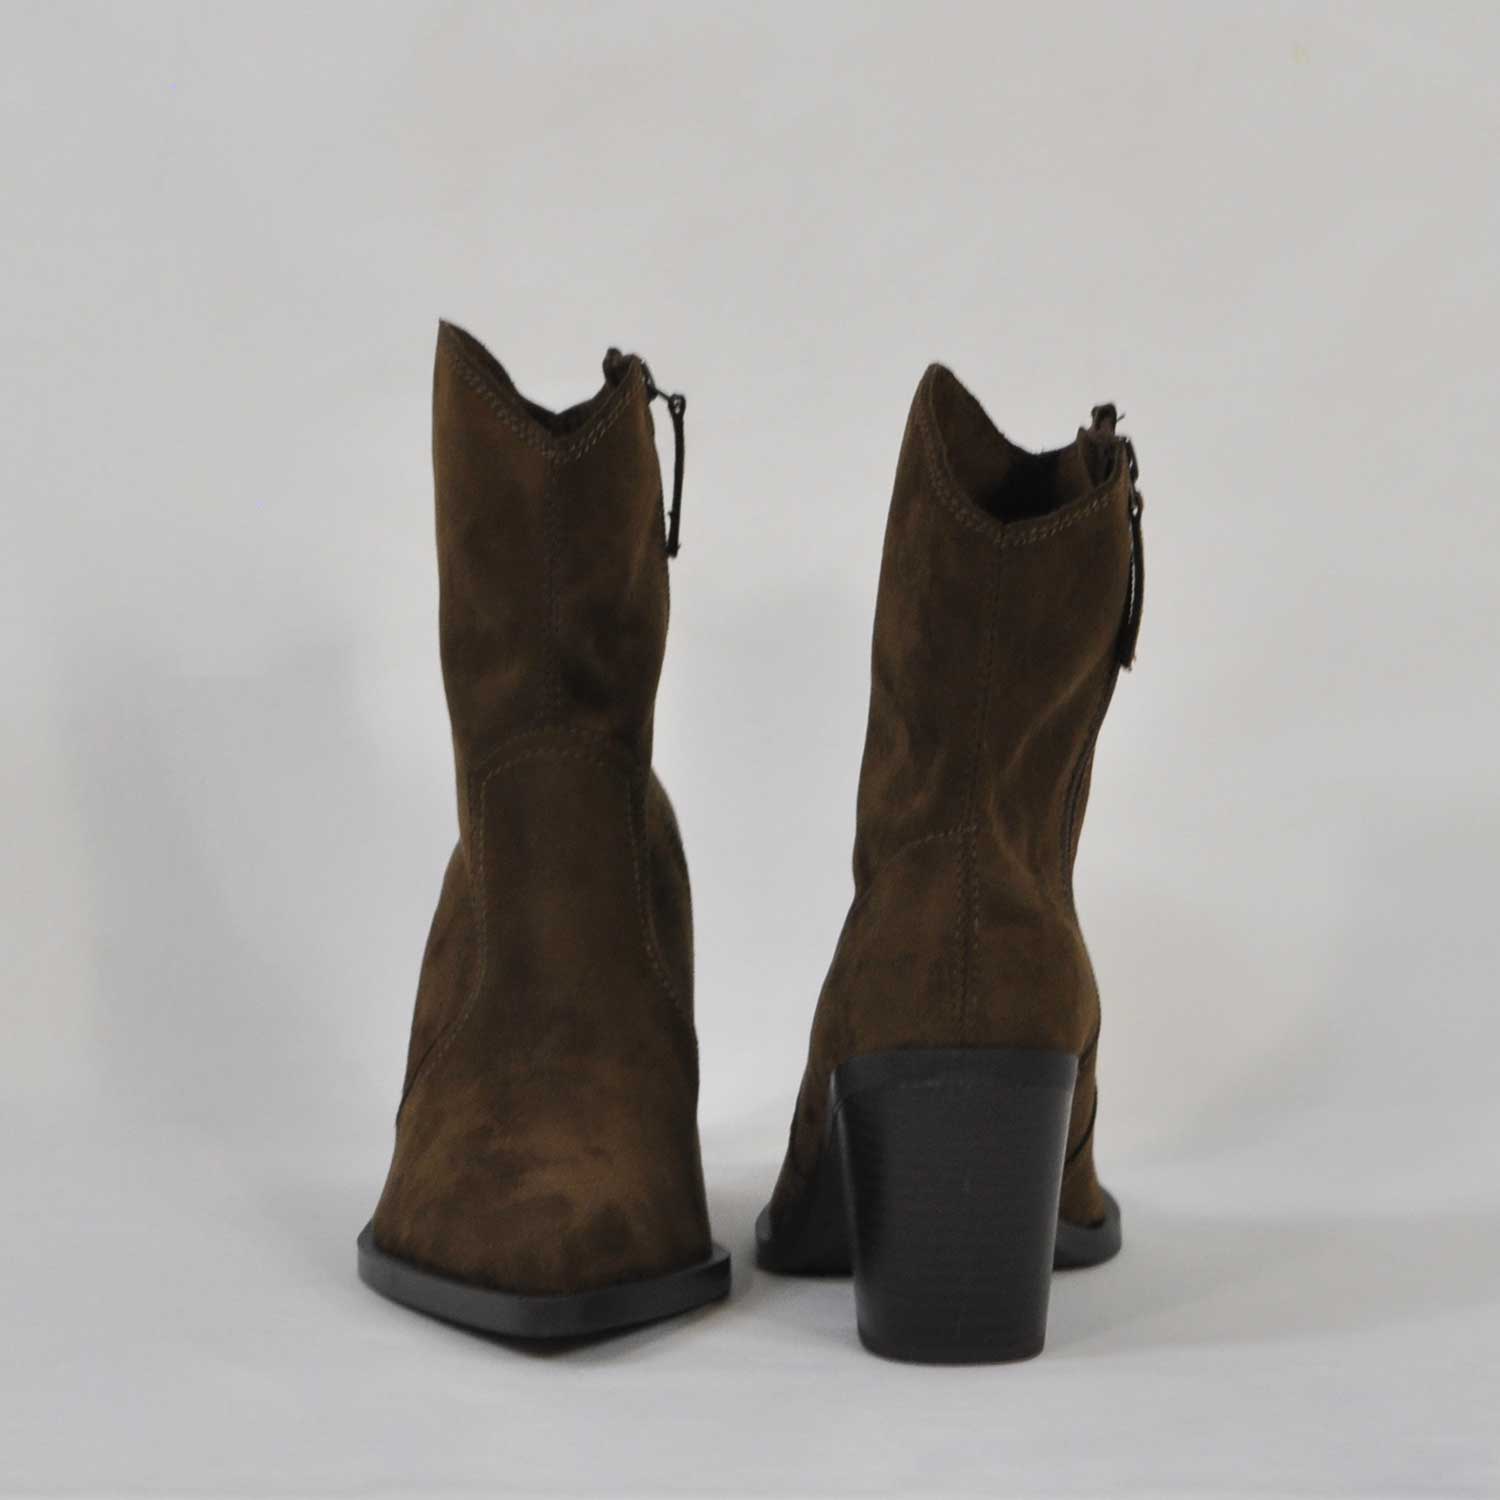 Brown square heel ankle boots